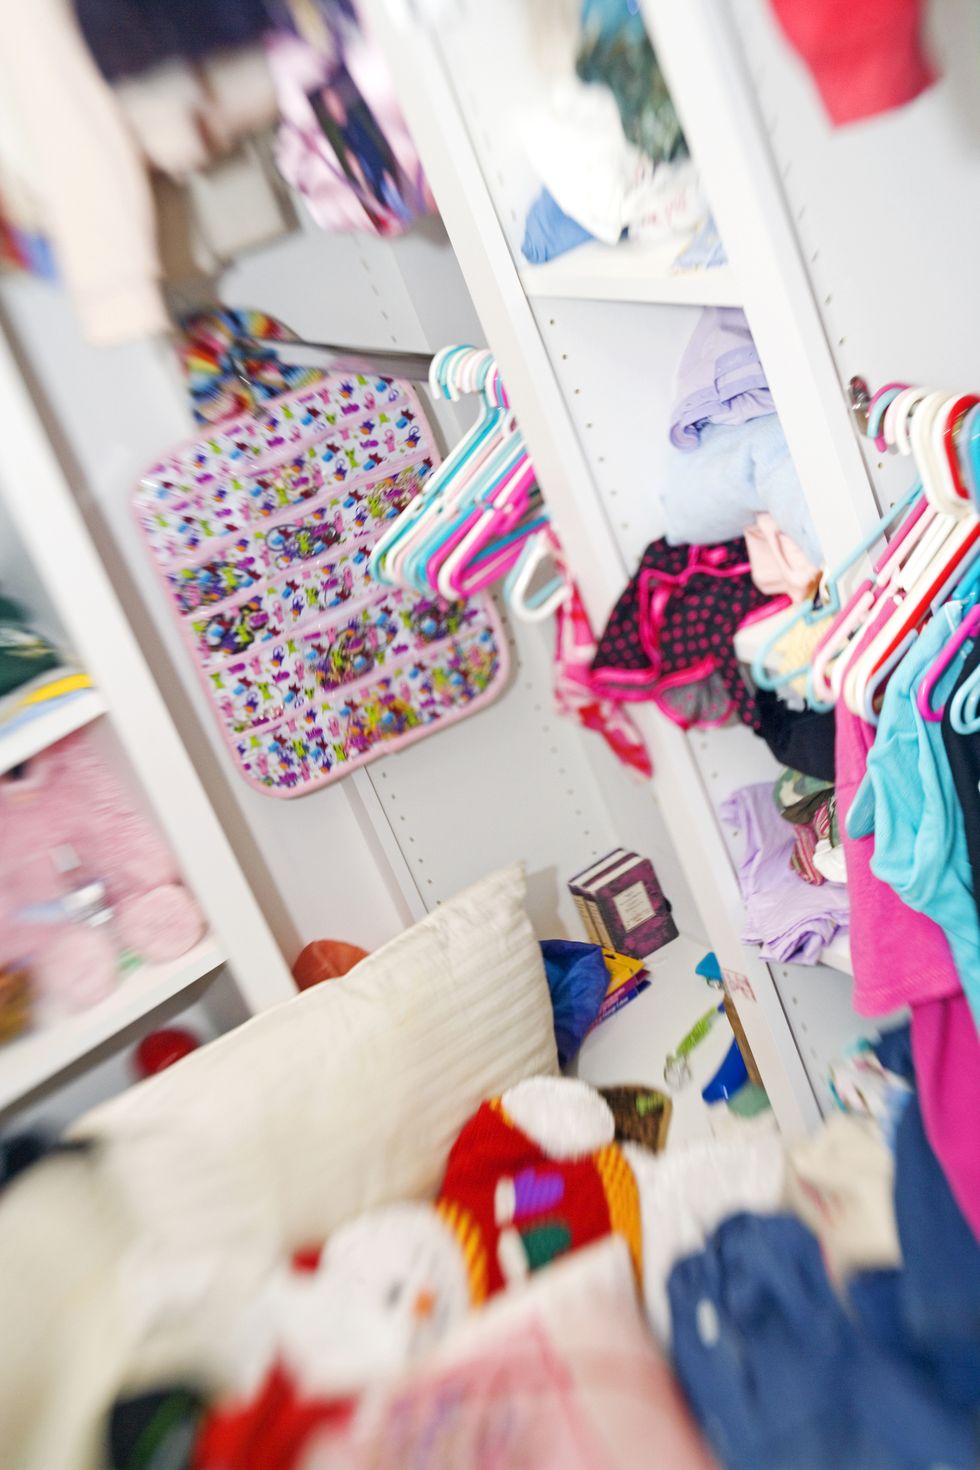 Messy white closet with children's clothing and toys